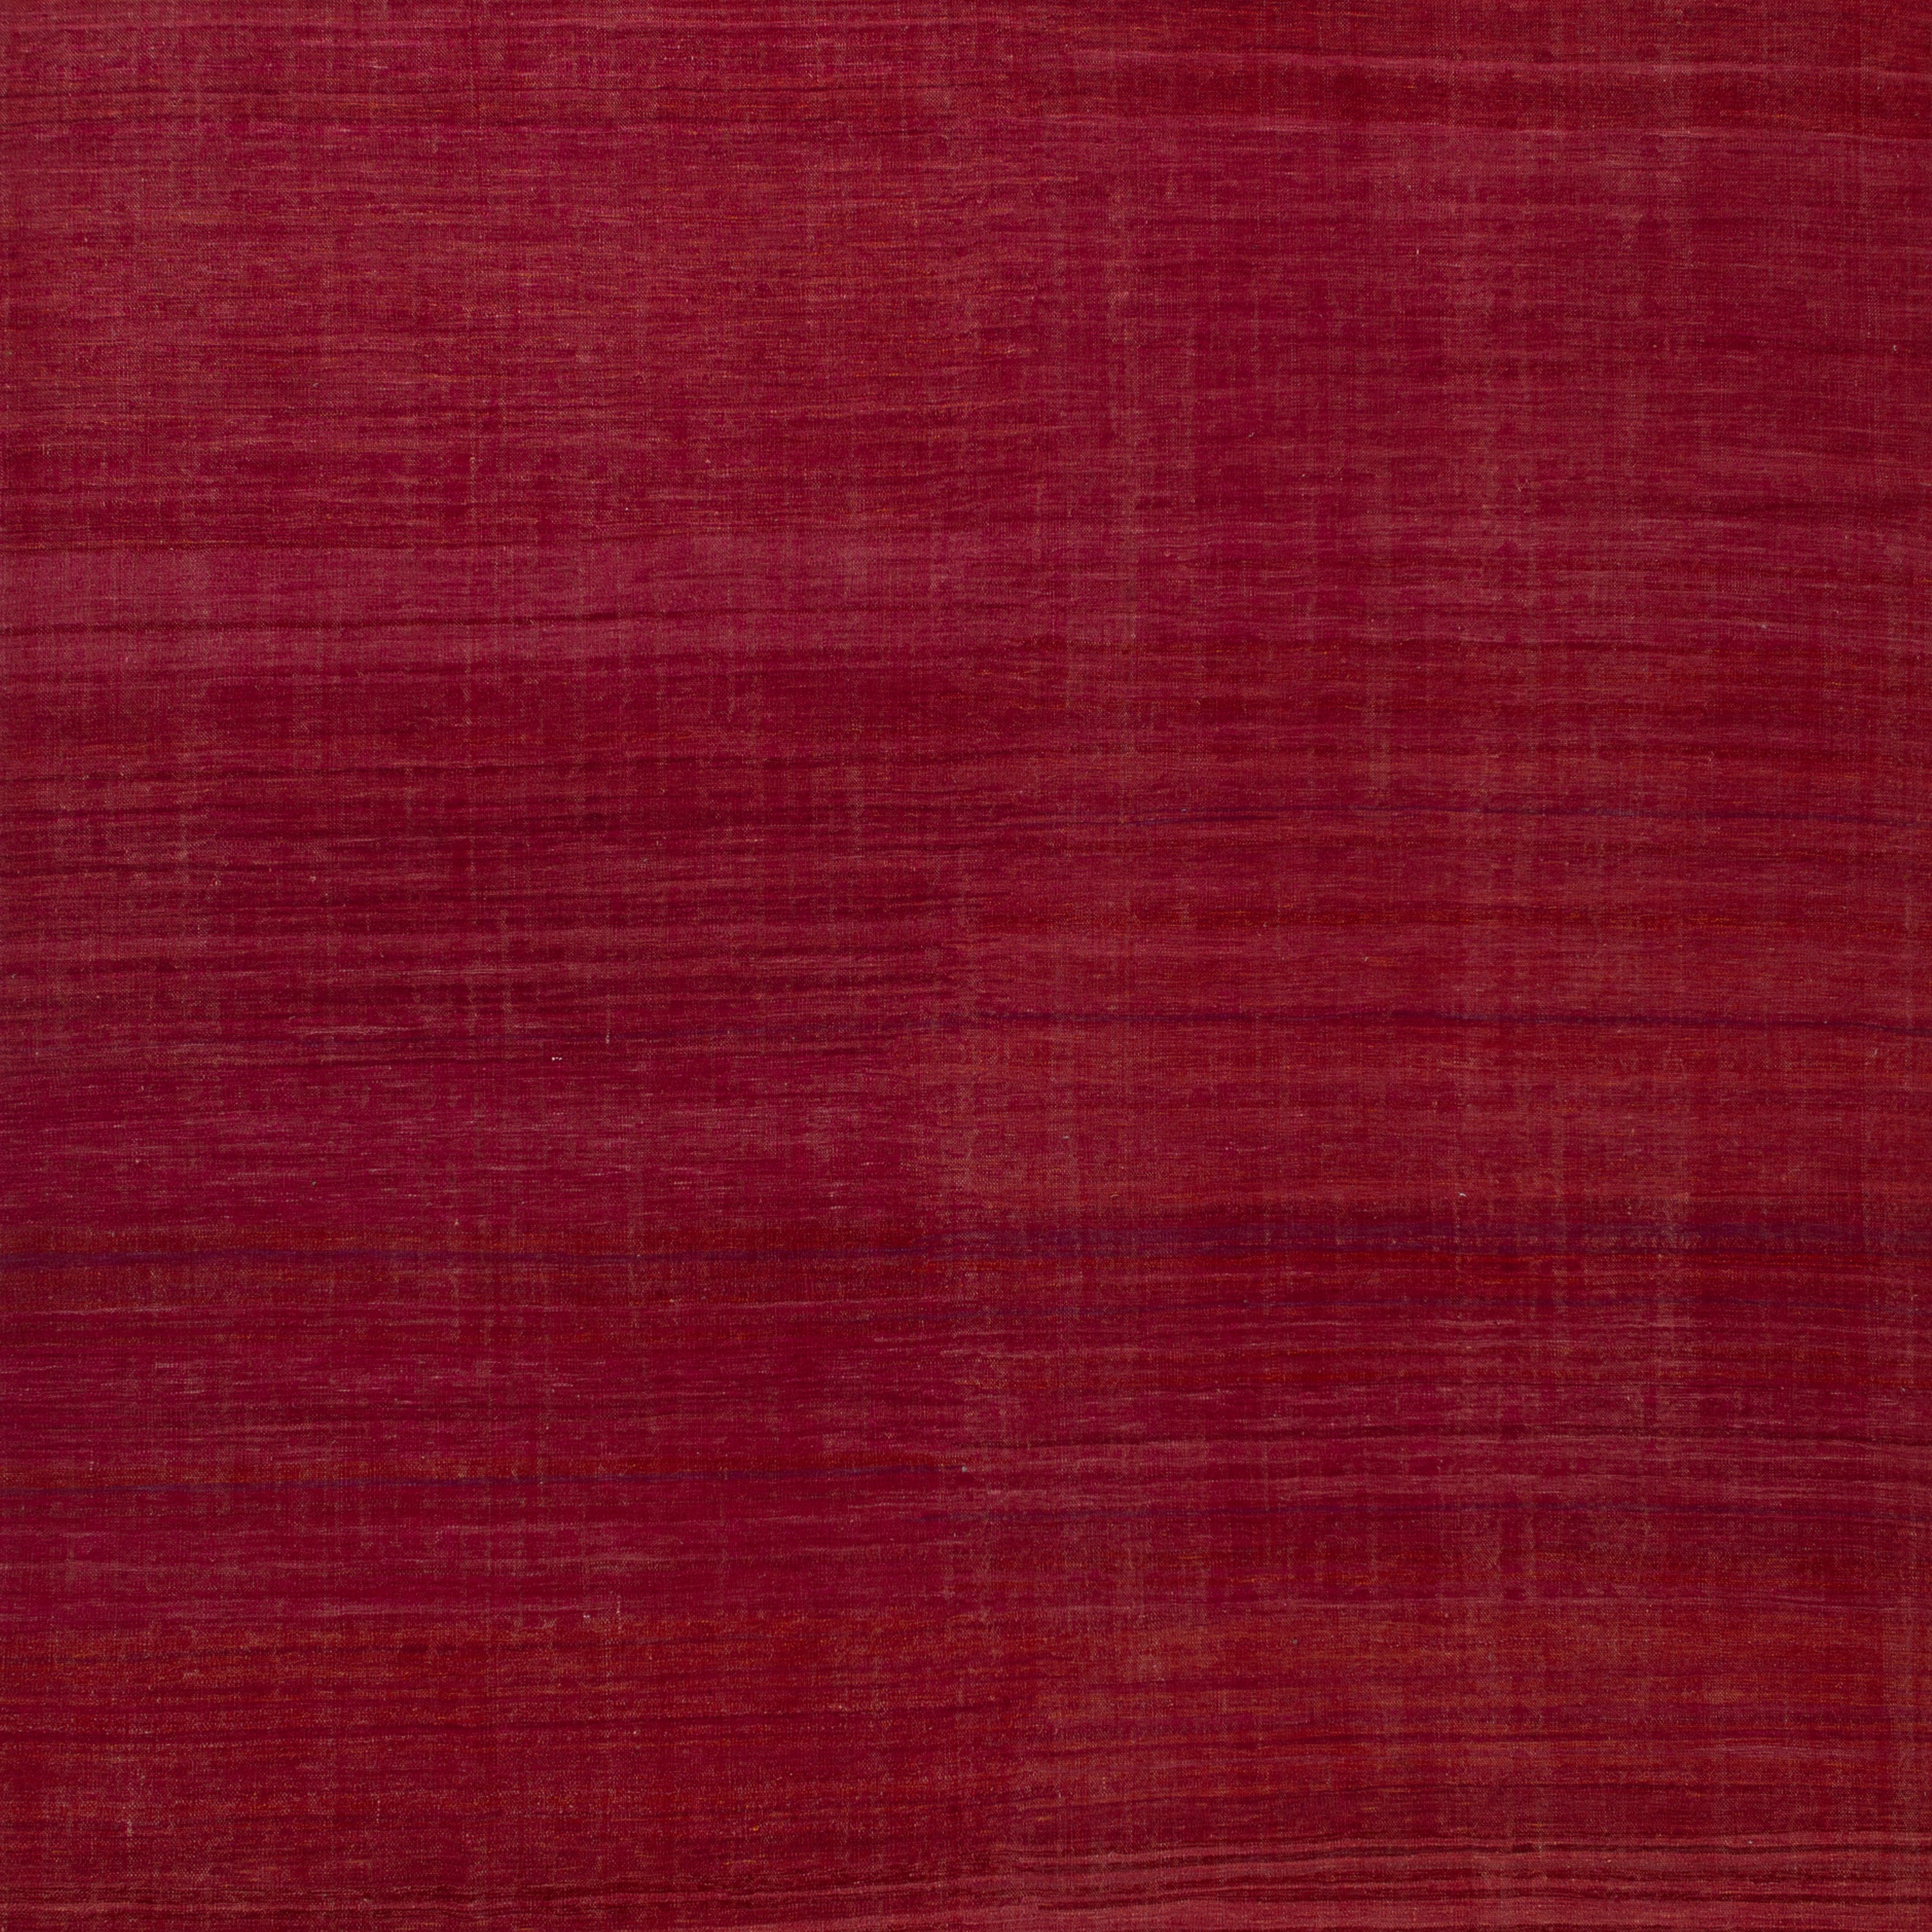 Red Flatweave Cotton Rug - 10'1" x 13'7"